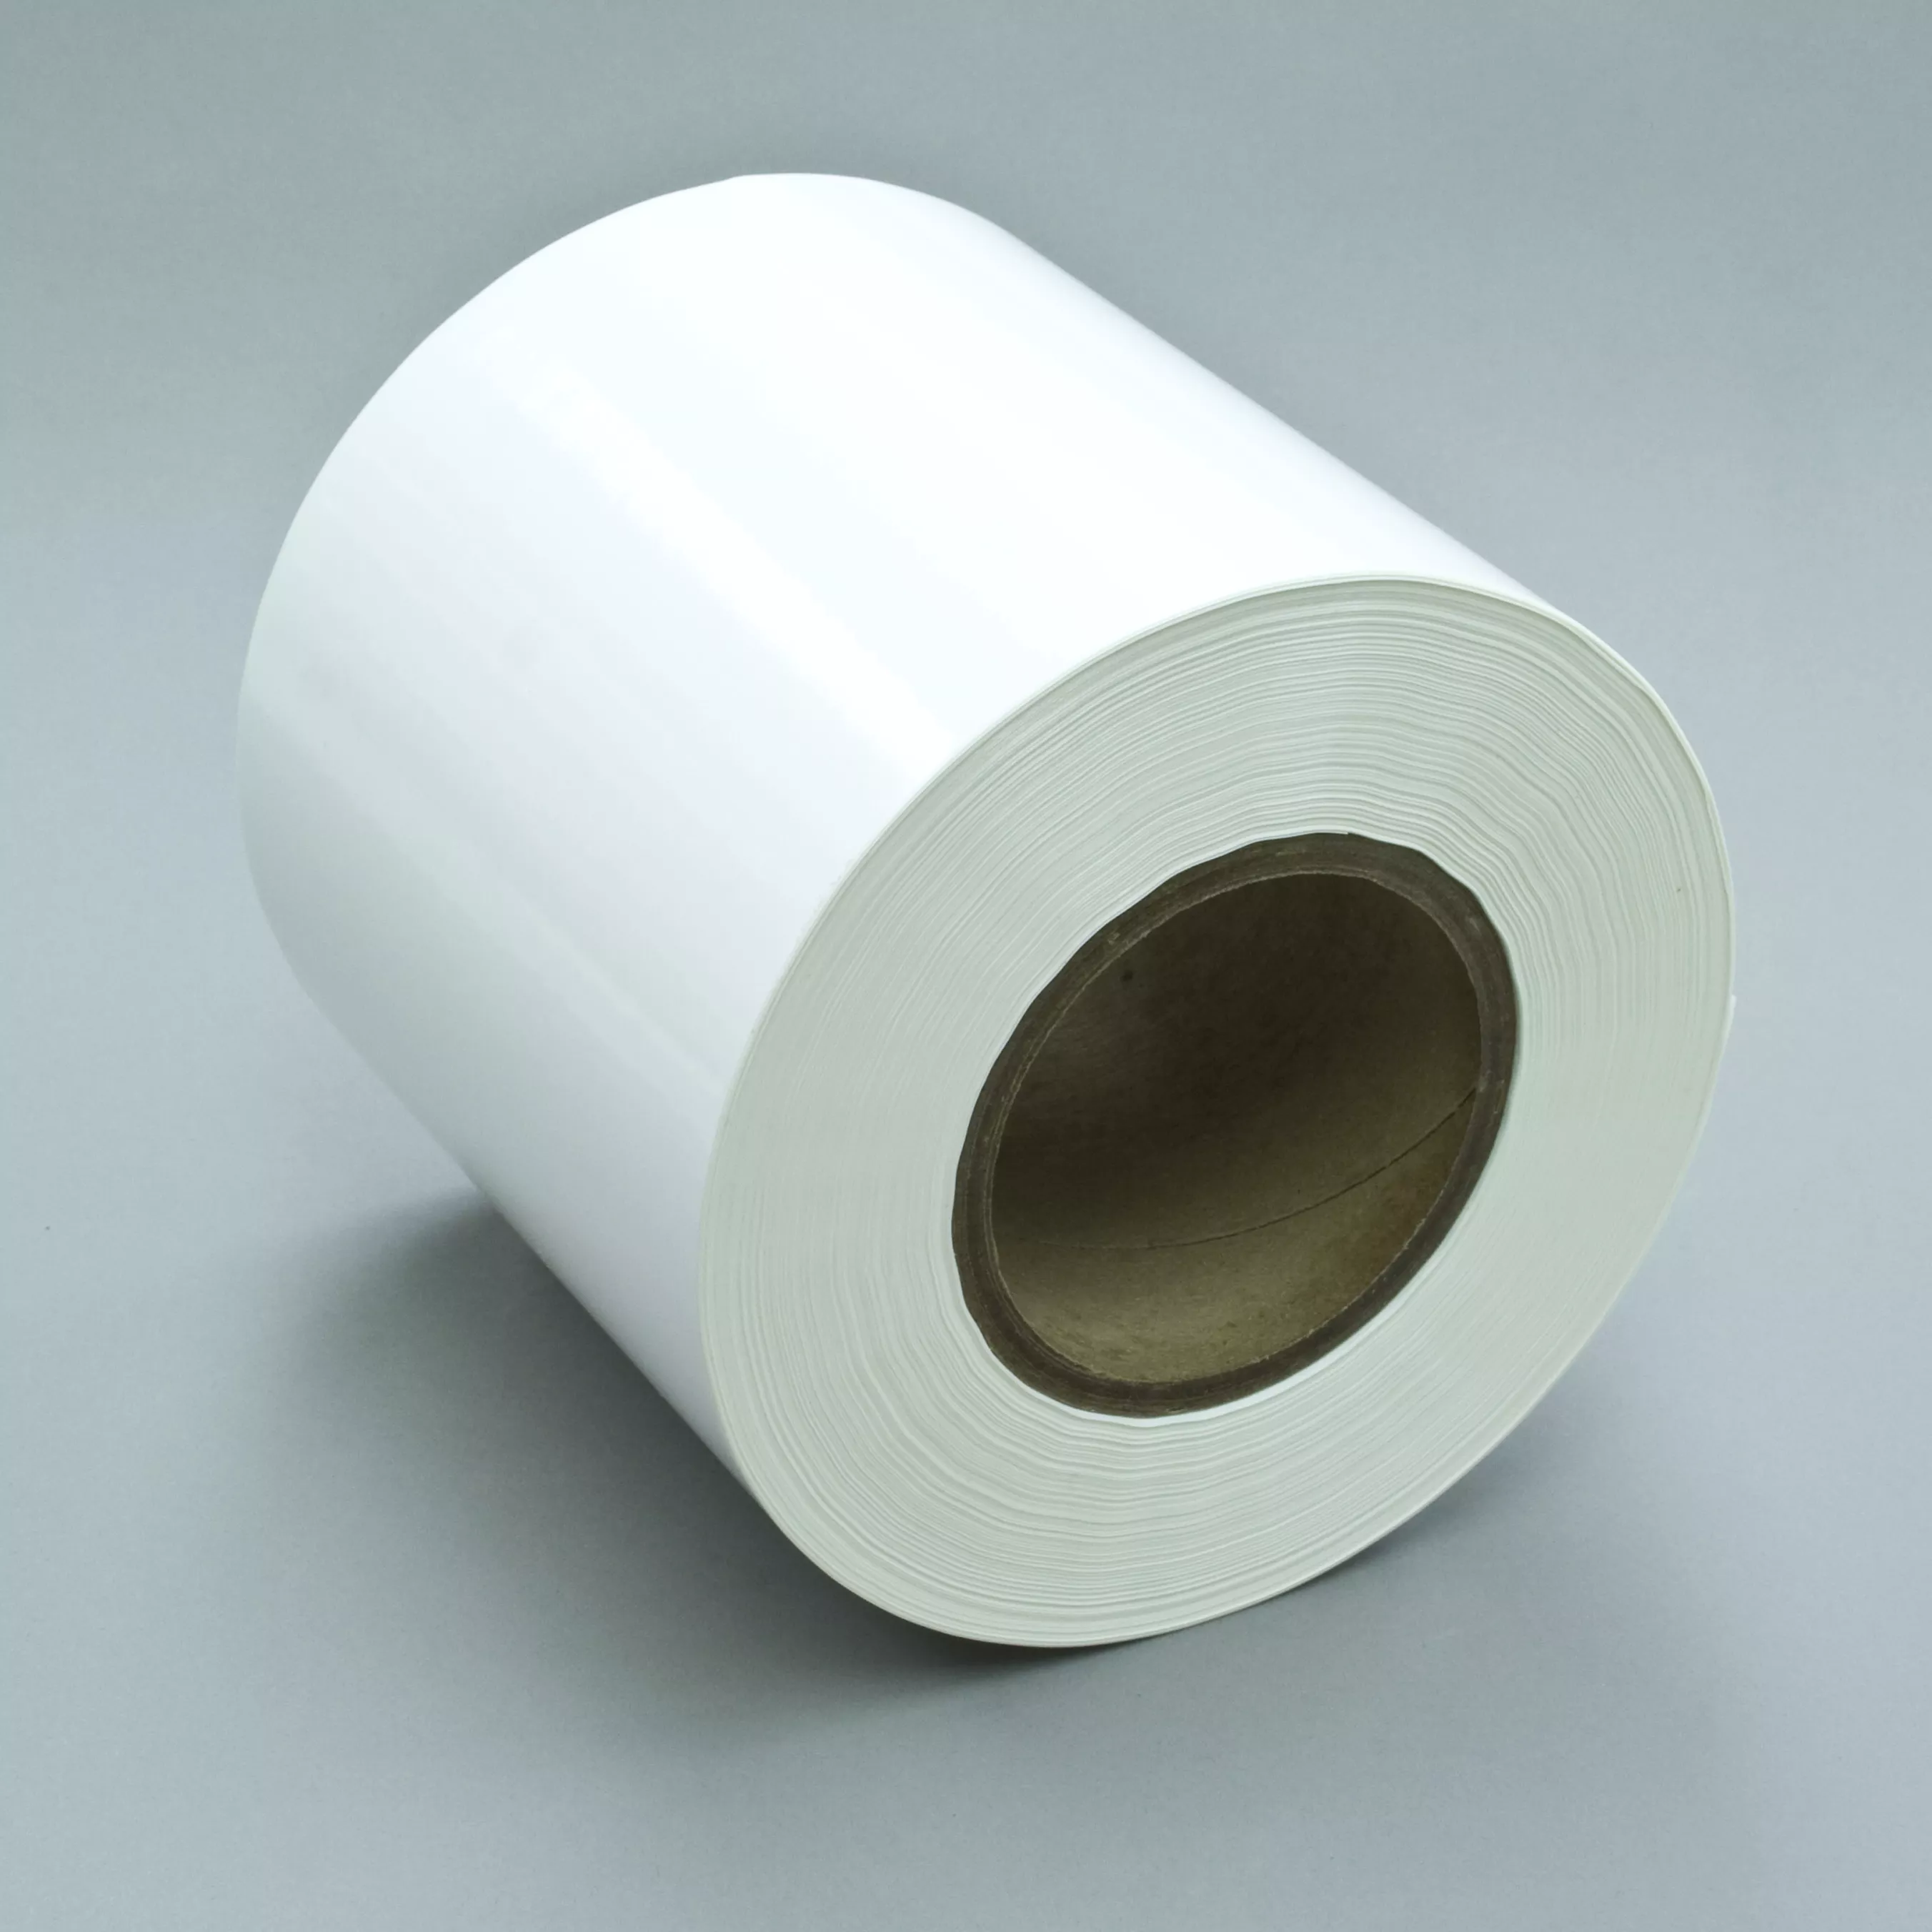 3M™ Thermal Transfer Label Material 7812, Matte White Polyimide, 6 in x
500 ft, 1 Roll/Case